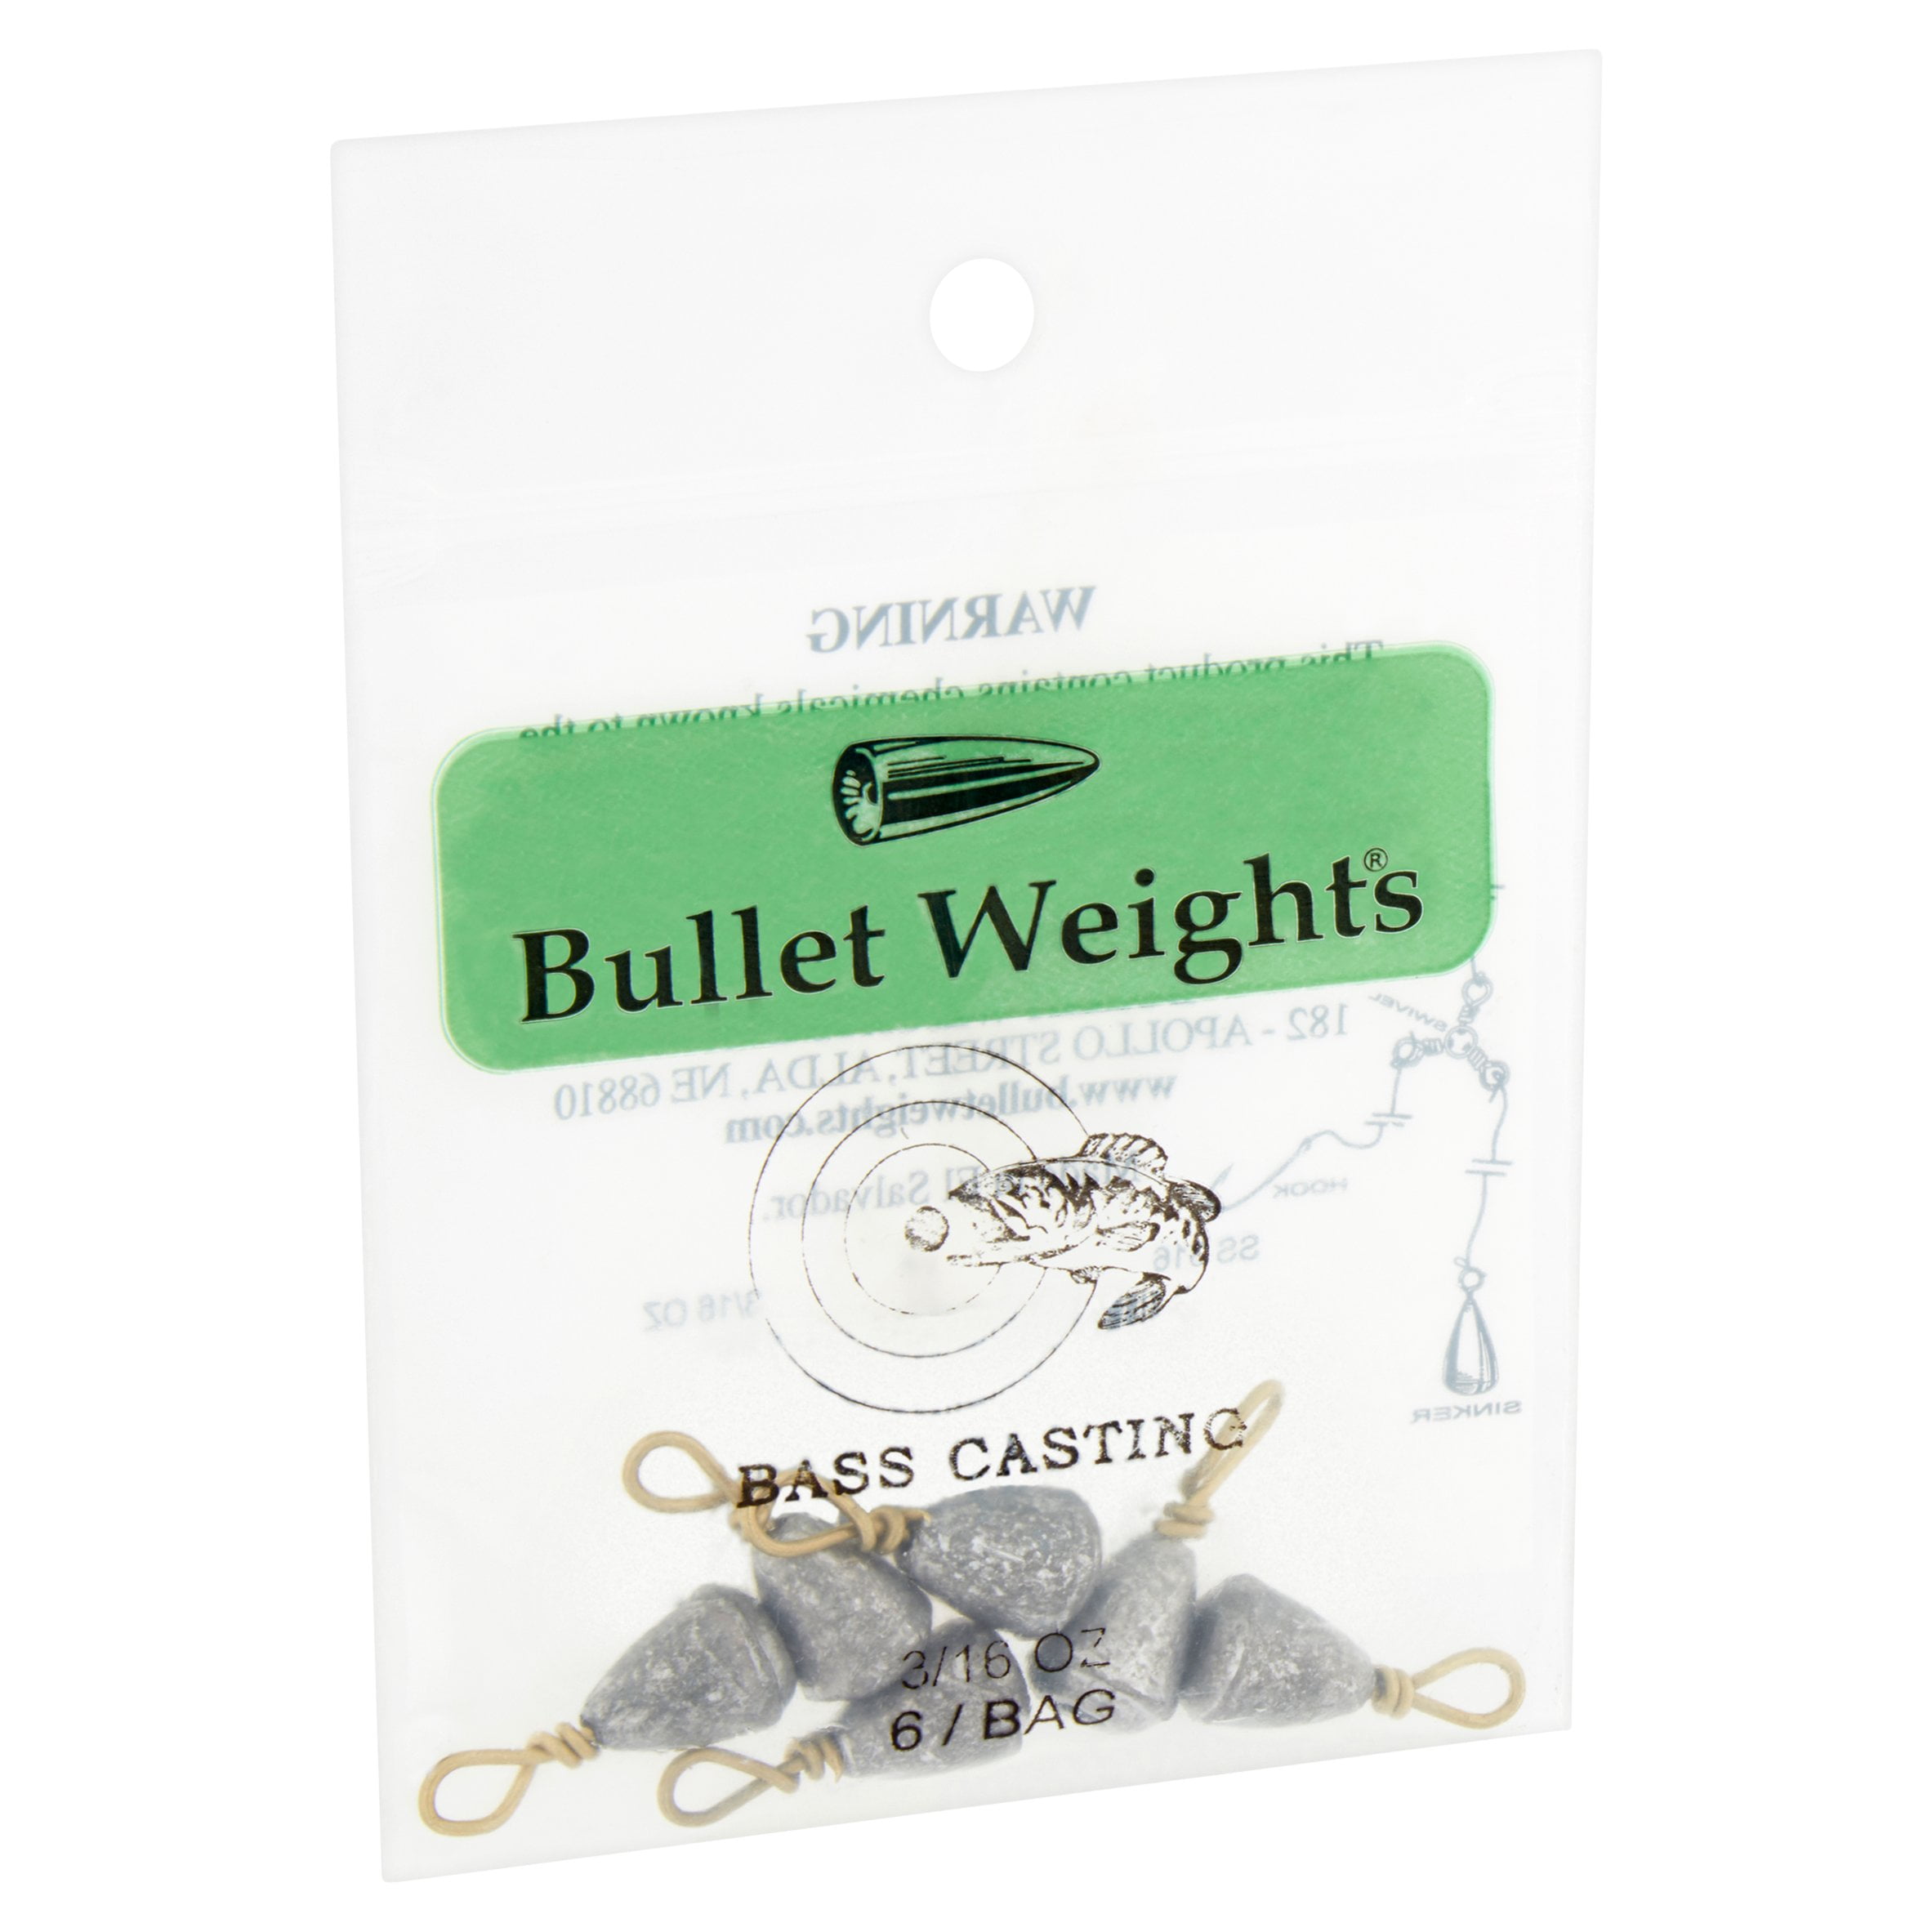 Bullet Weights® Bass Casting #9, 3/16 Oz. 6 sinkers 